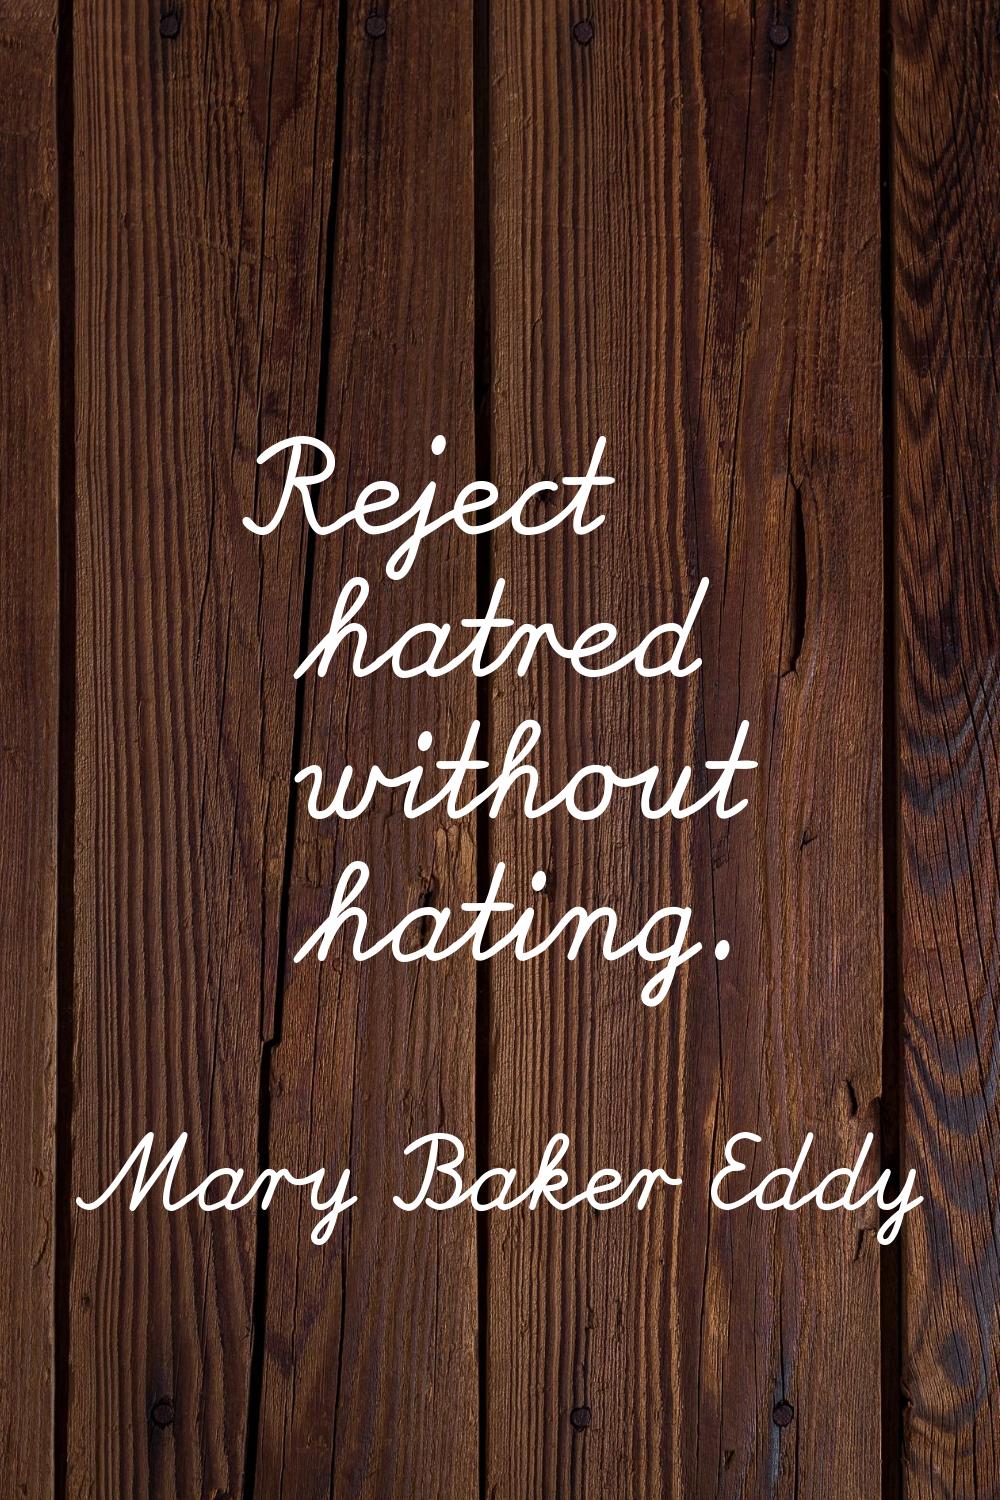 Reject hatred without hating.